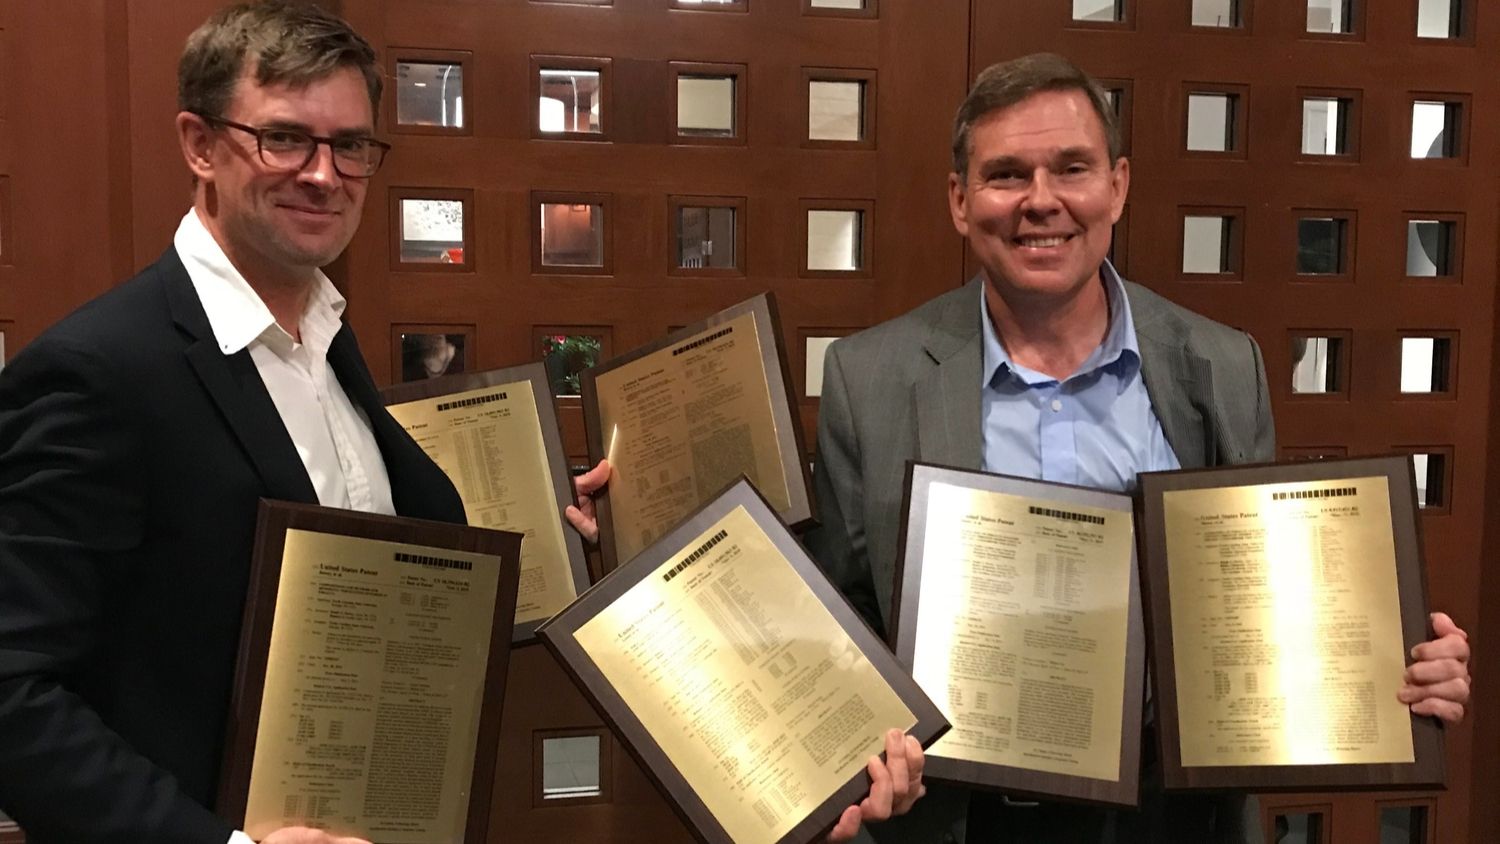 NC State Crop and Soil Sciences researchers Ramsey Lewis and Ralph Dewey were recognized for plant and genetic innovation patents at an NC State awards ceremony in 2019.